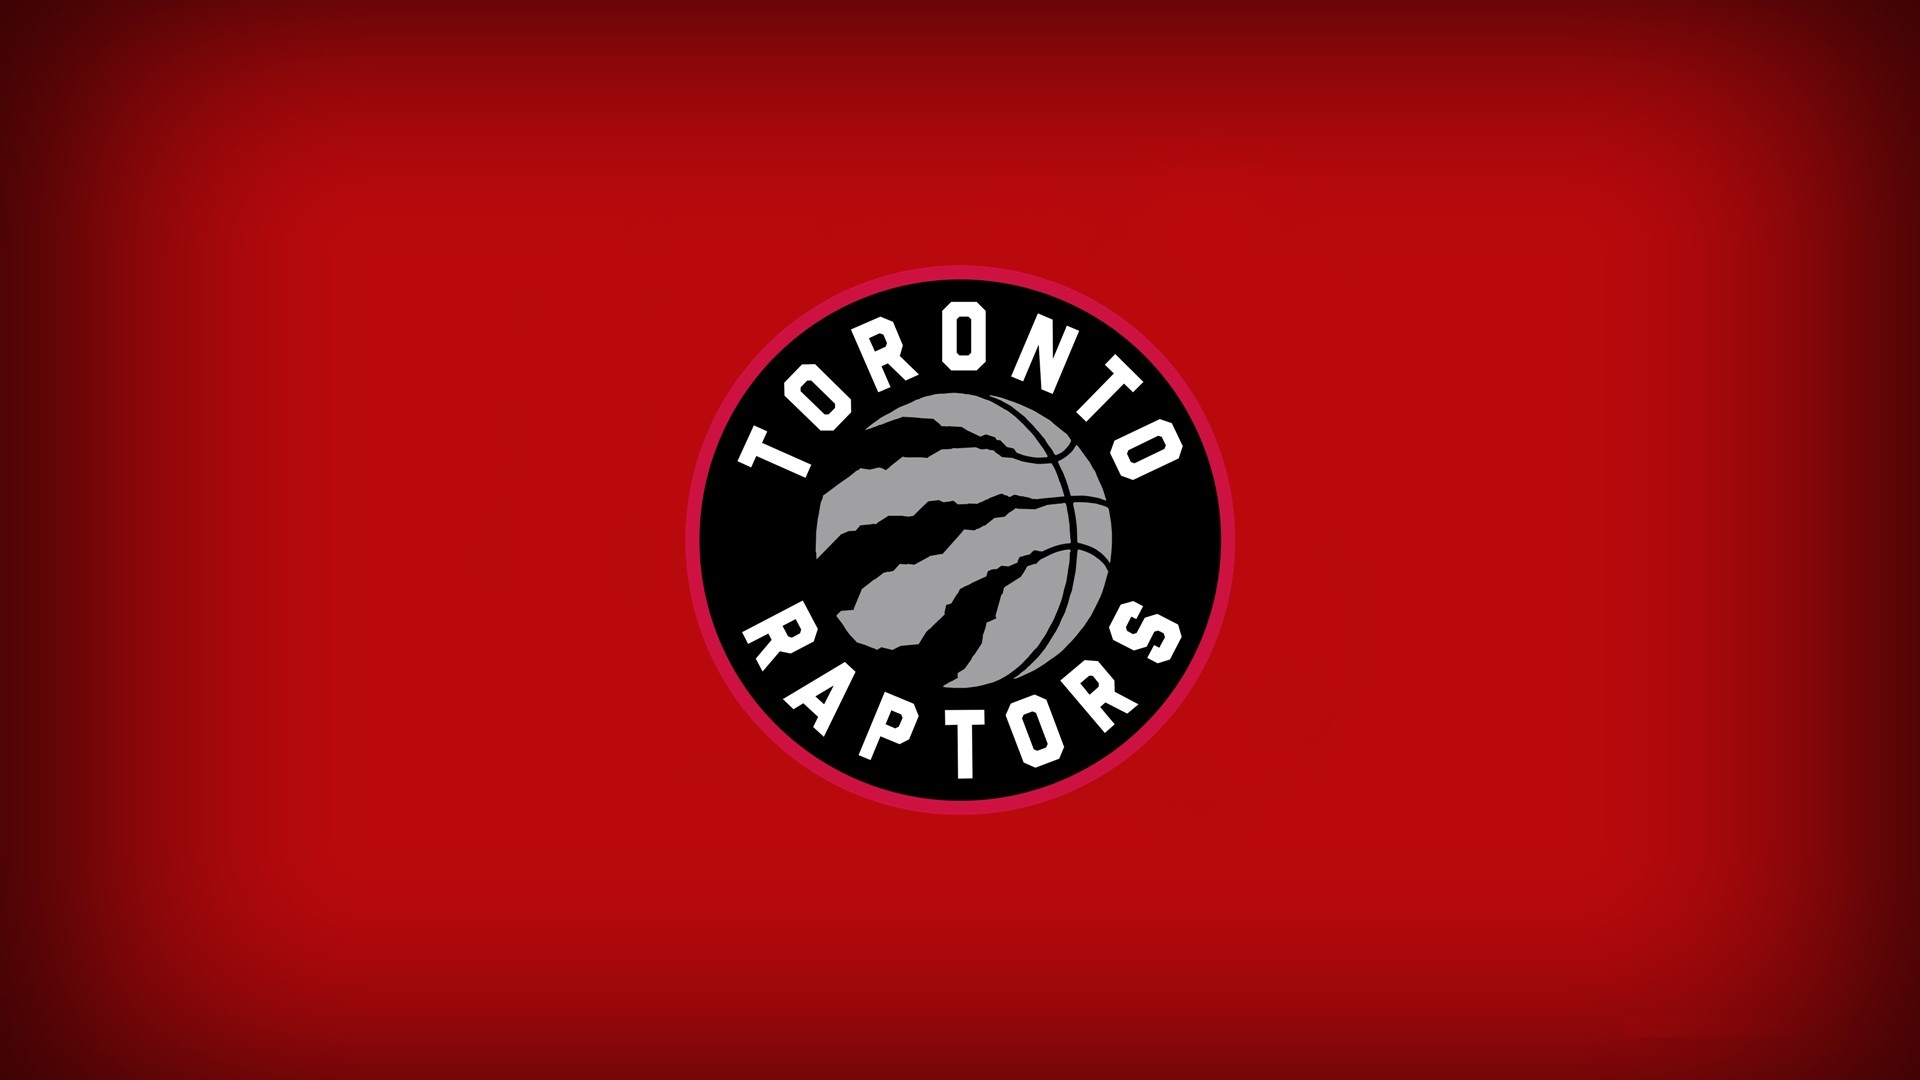 NBA Raptors Wallpaper HD with image dimensions 1920x1080 pixel. You can make this wallpaper for your Desktop Computer Backgrounds, Windows or Mac Screensavers, iPhone Lock screen, Tablet or Android and another Mobile Phone device